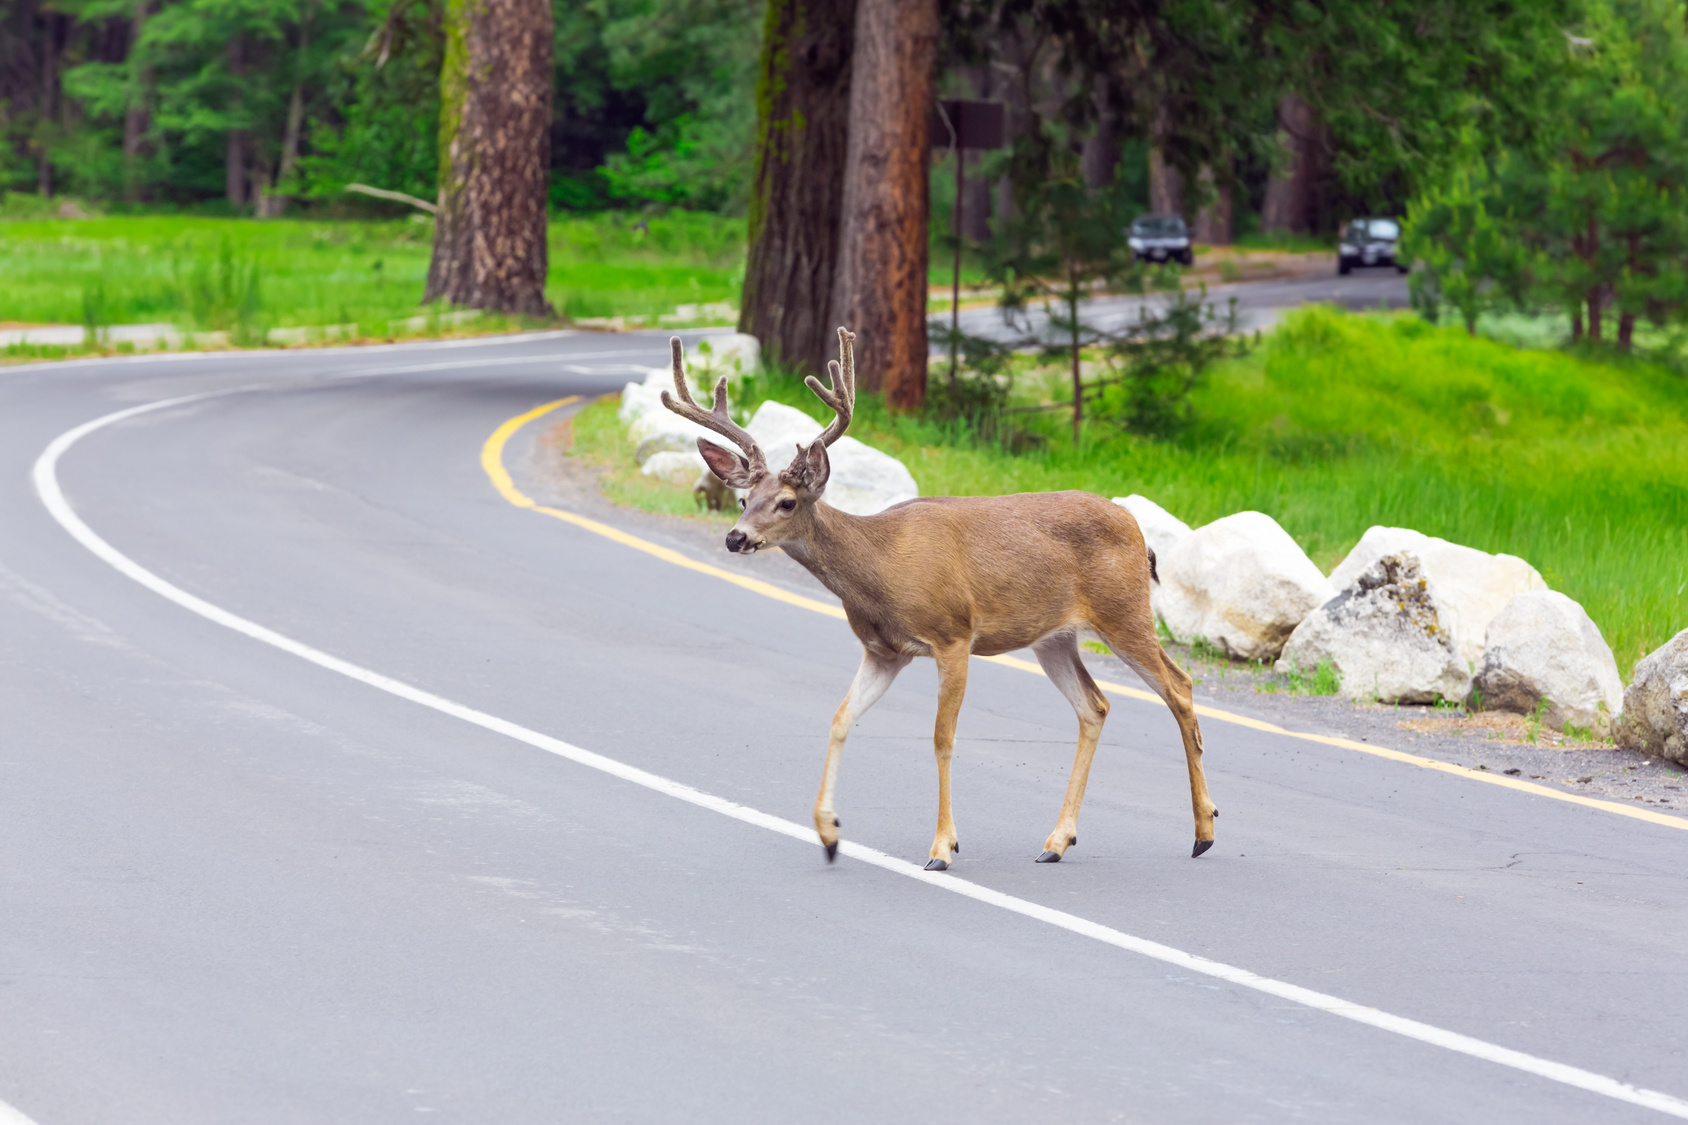 How To: Avoiding Deer Collisions